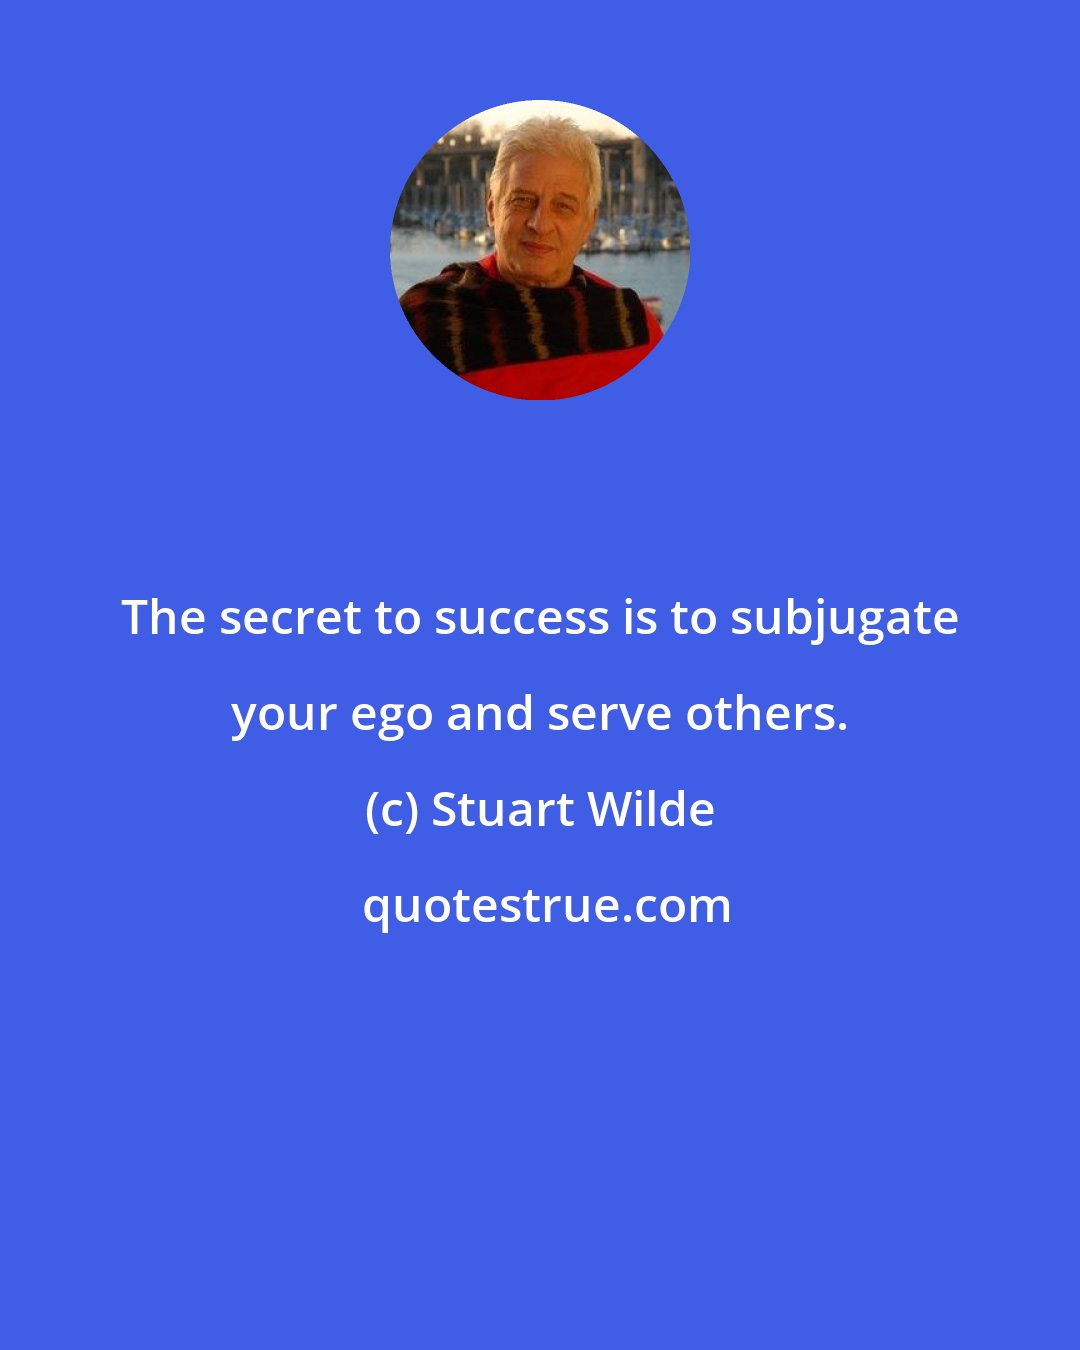 Stuart Wilde: The secret to success is to subjugate your ego and serve others.